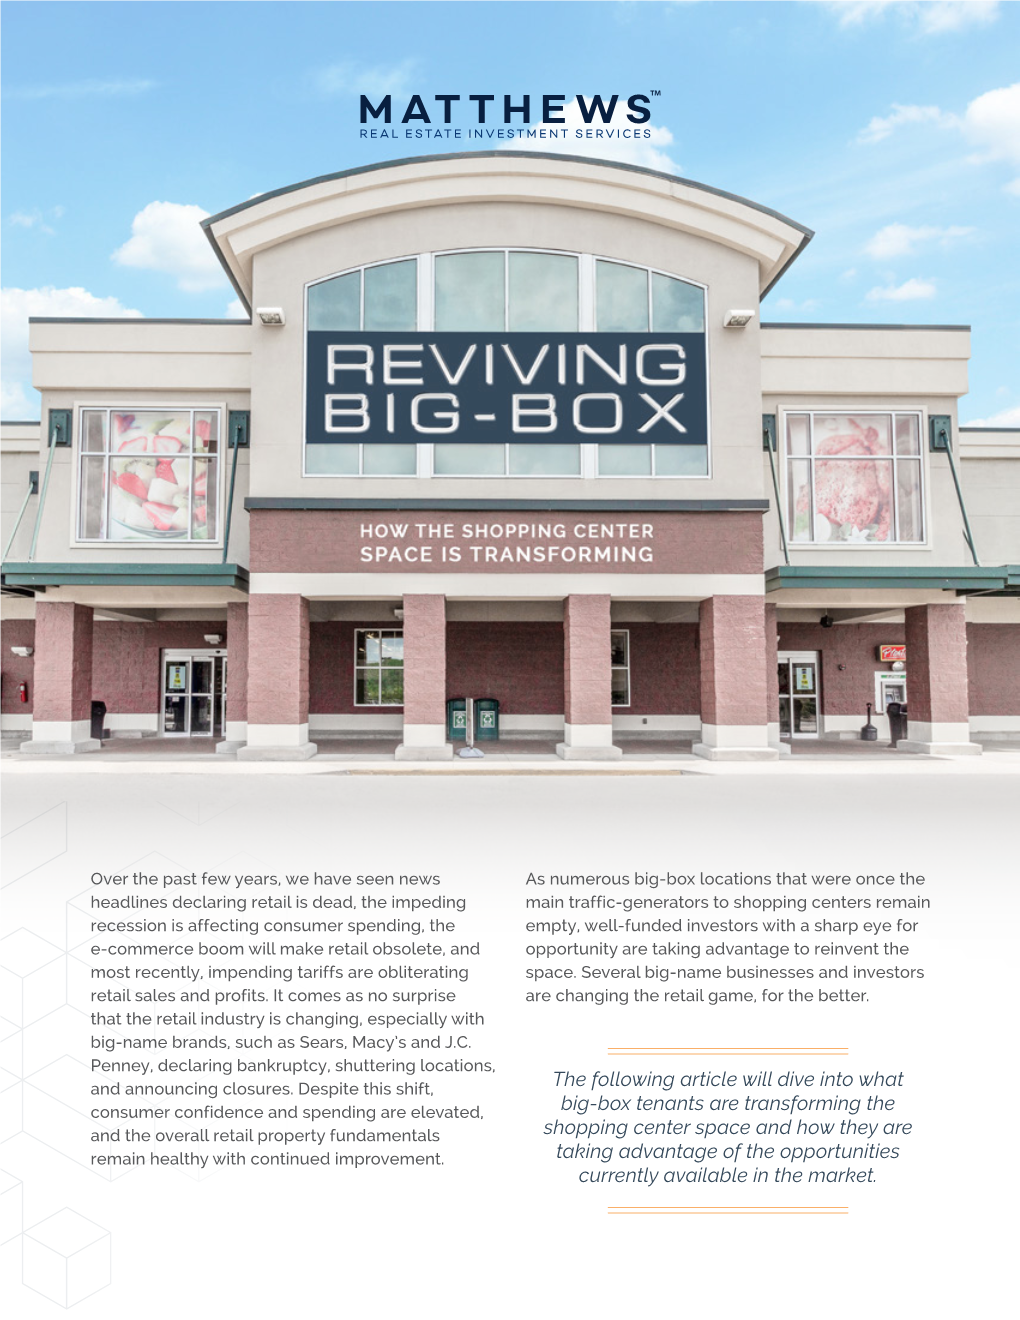 Reviving Big Box- How the Shopping Center Space Is Transforming